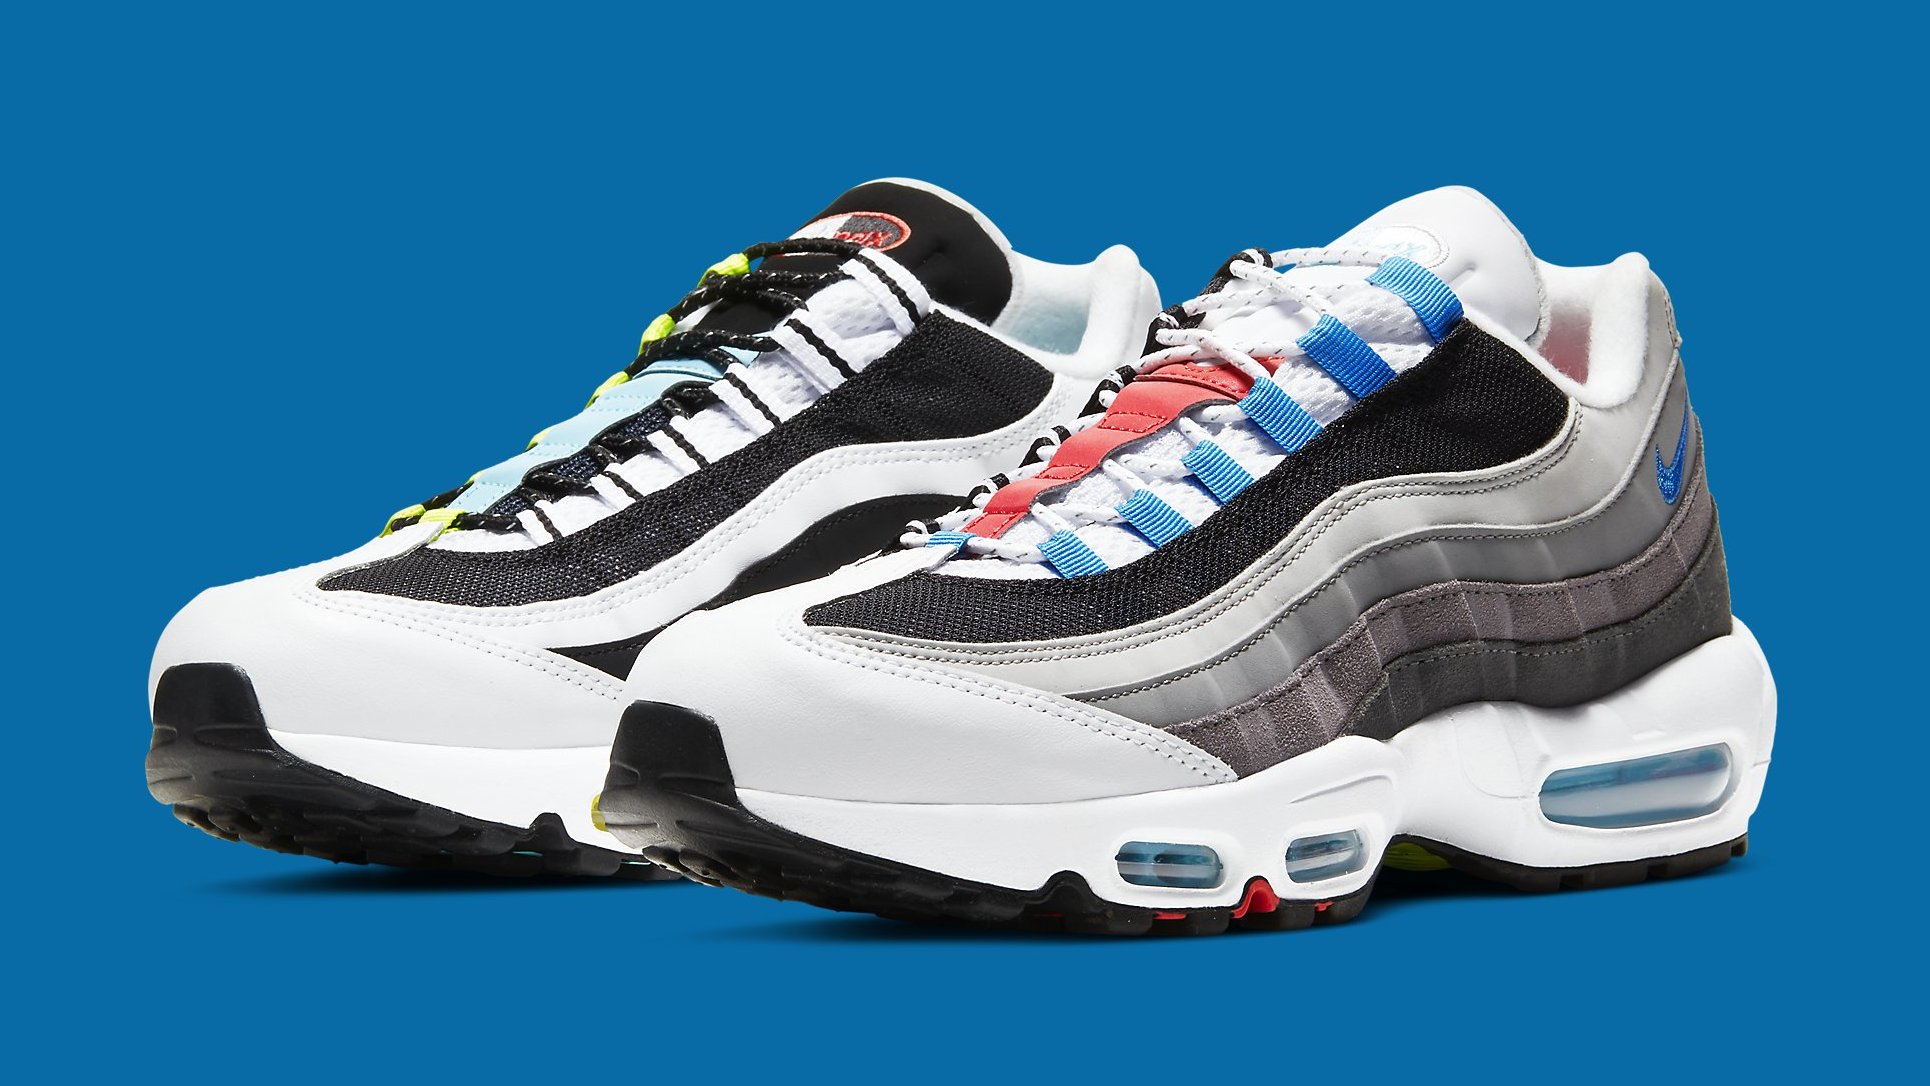 Vegetatie mond Fjord Best Look Yet at the 'Greedy 2.0' Air Max 95 | Complex